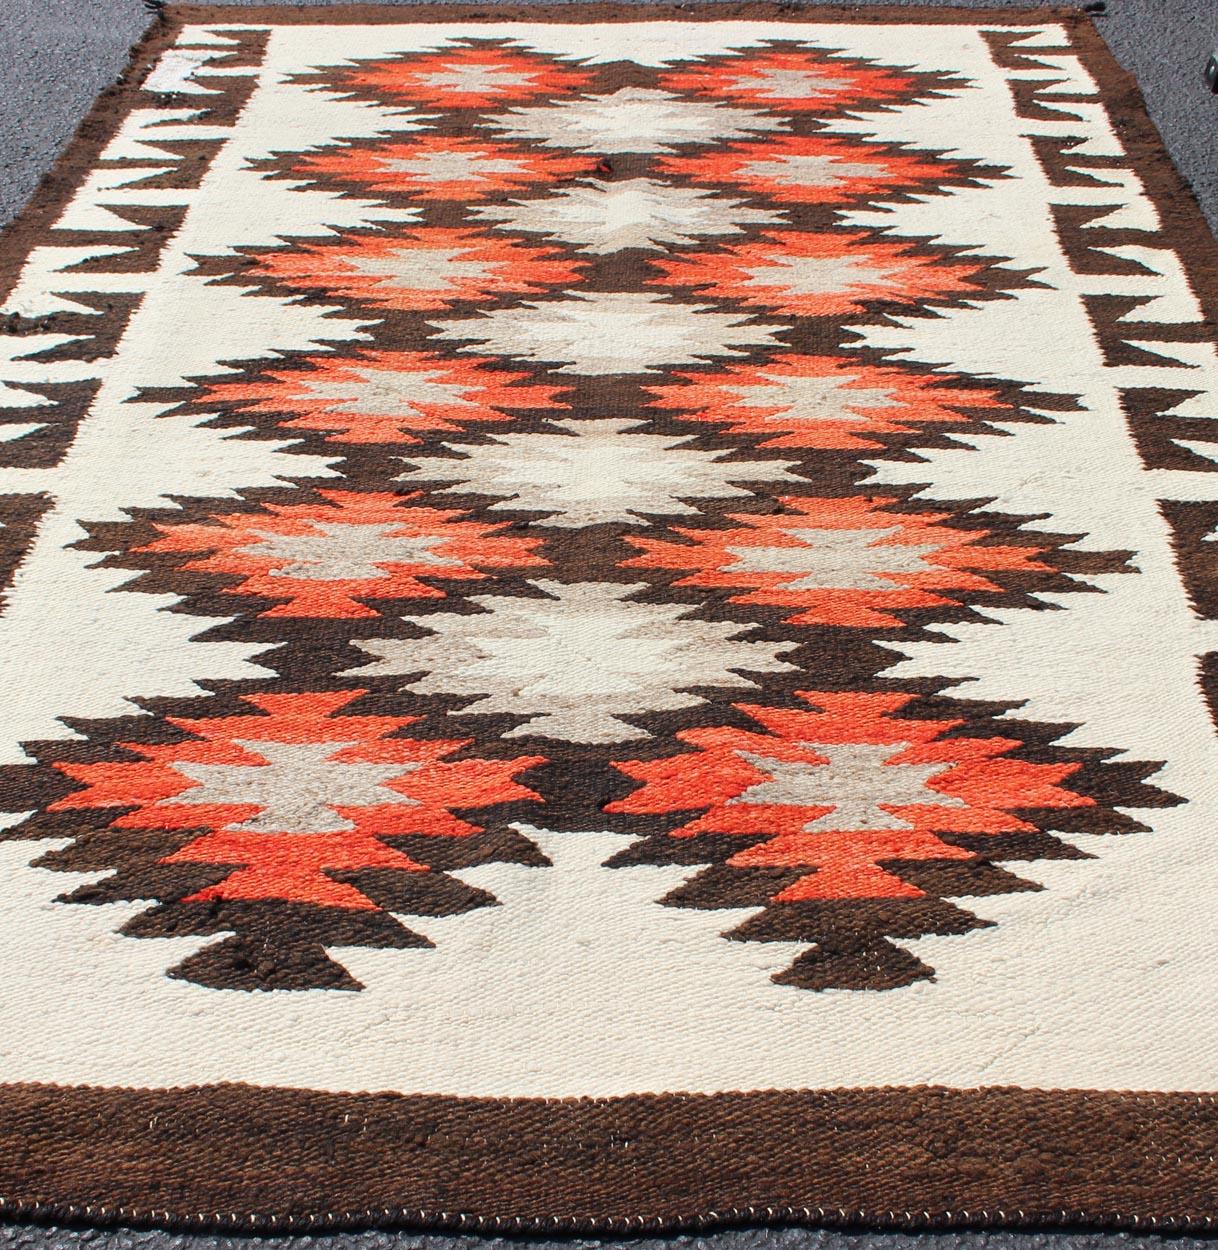 Vintage American Navajo Tribal Rug with Diamonds in Brown, Orange and Ivory For Sale 4